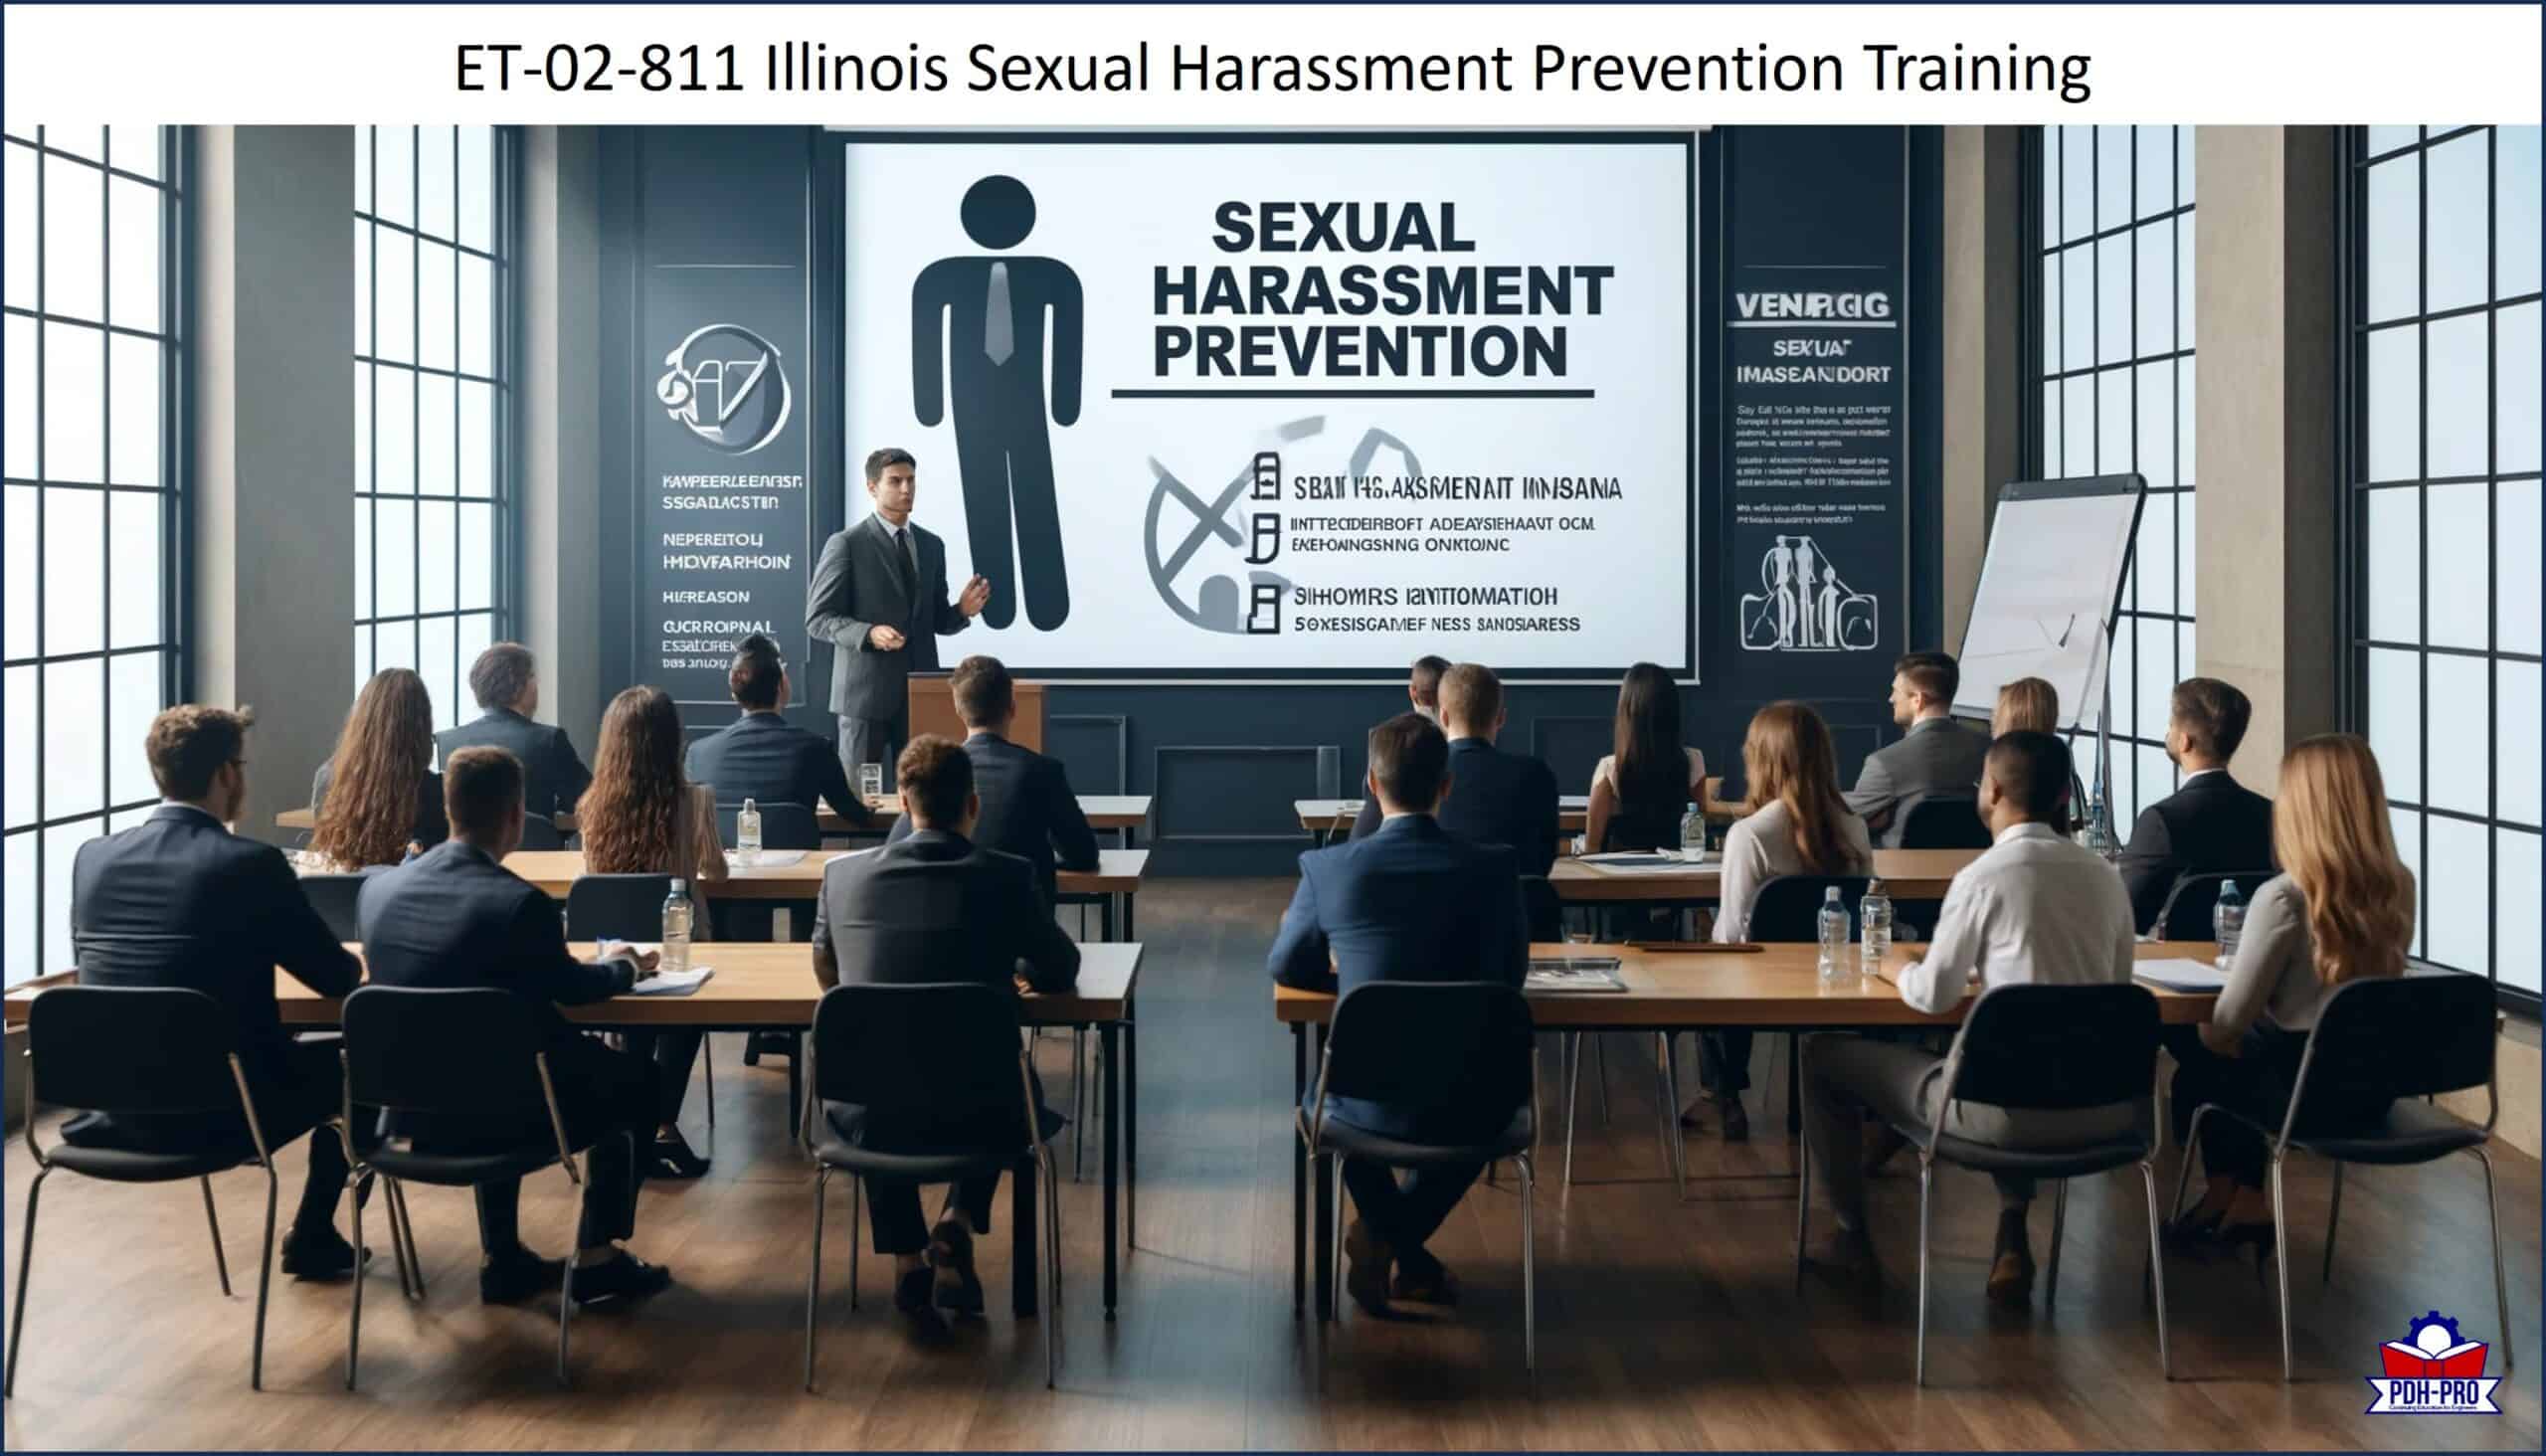 Illinois Sexual Harassment Prevention Training